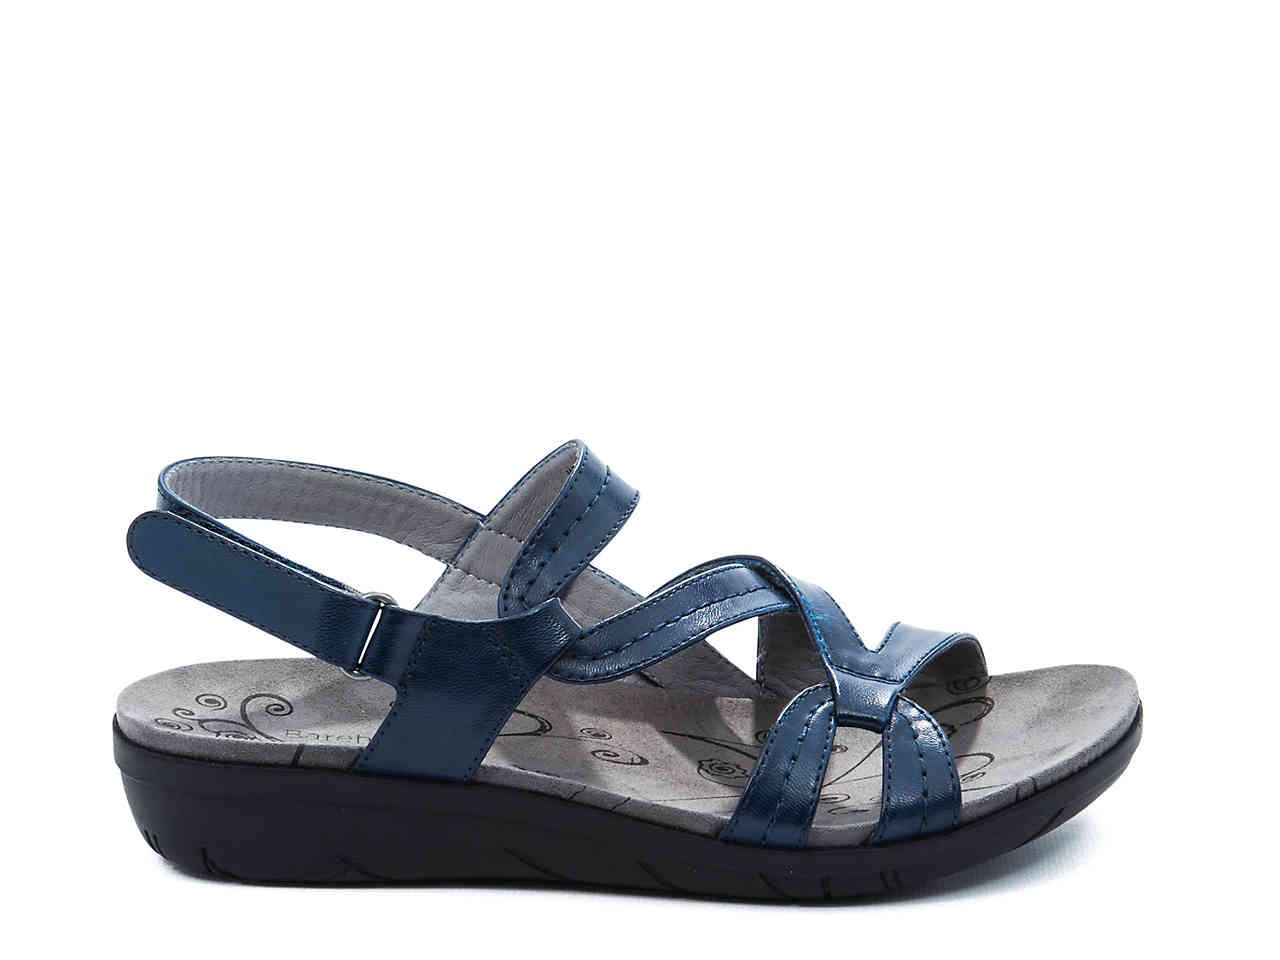 NEW Bare Traps SANDALS Jaycee Comfort Shoes SIZE 11 NAVY BLUE Leather